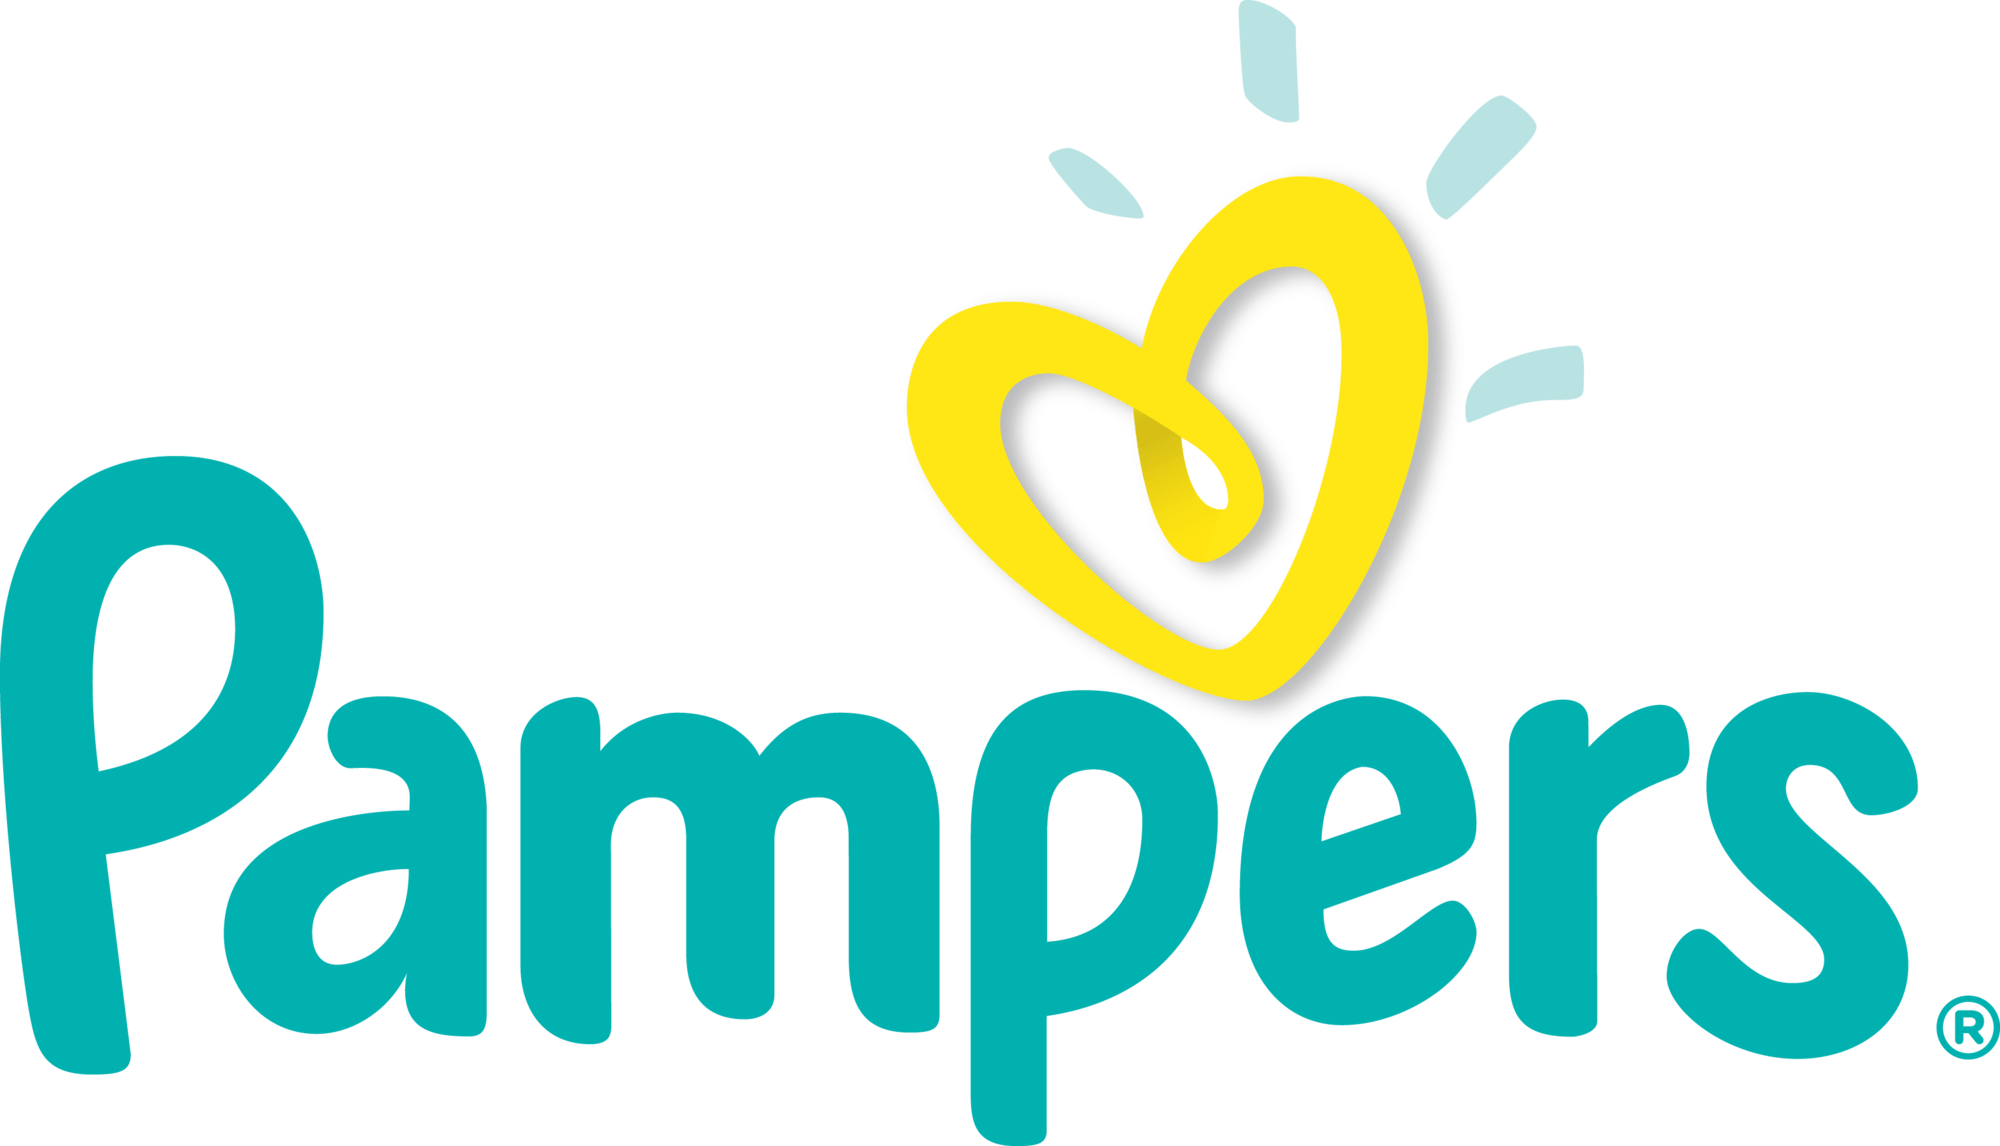 Pampers Logo - Pampers | Logopedia | FANDOM powered by Wikia